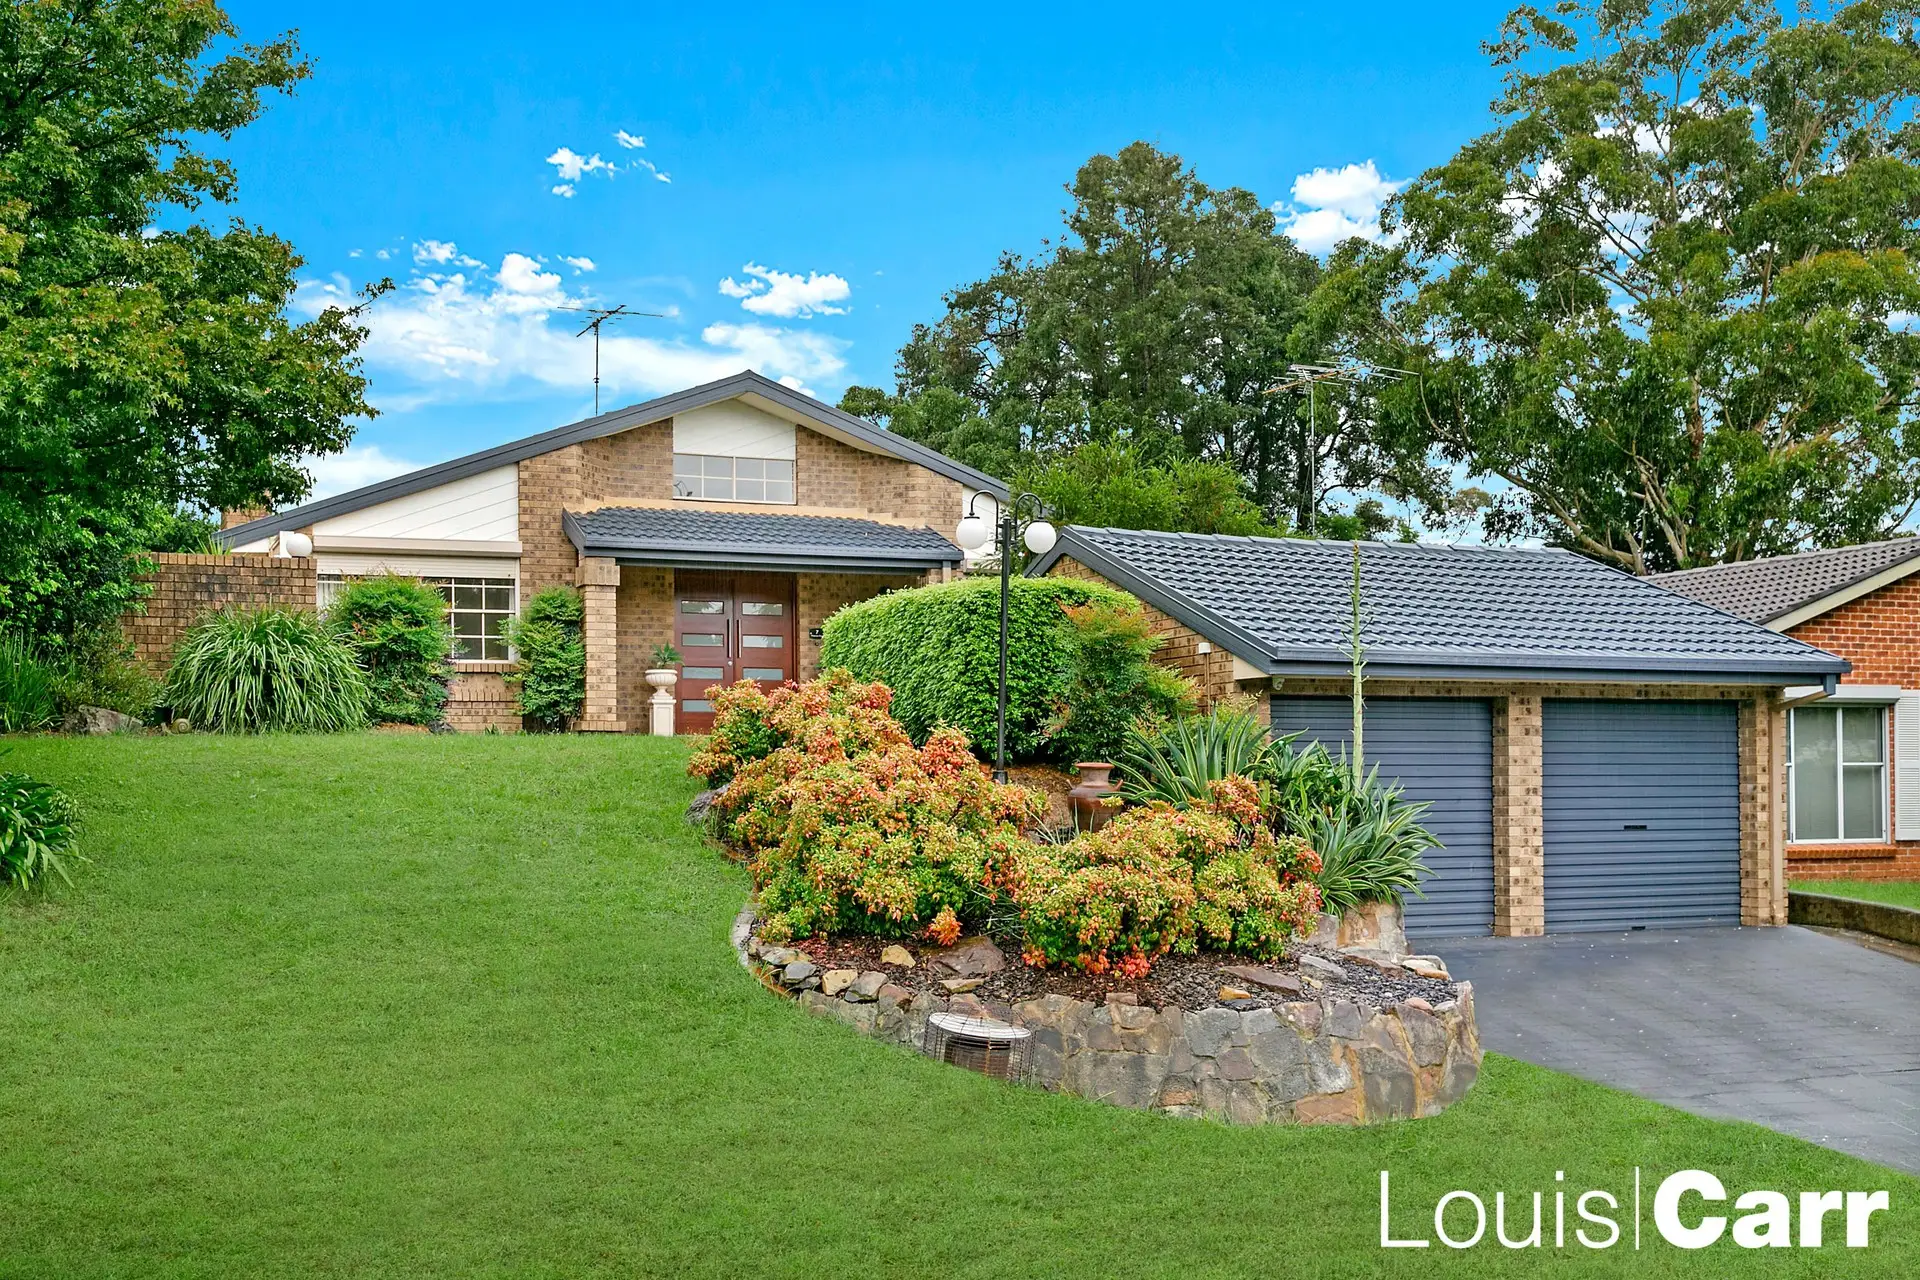 Photo #1: 7 Fairgreen Place, Castle Hill - Sold by Louis Carr Real Estate